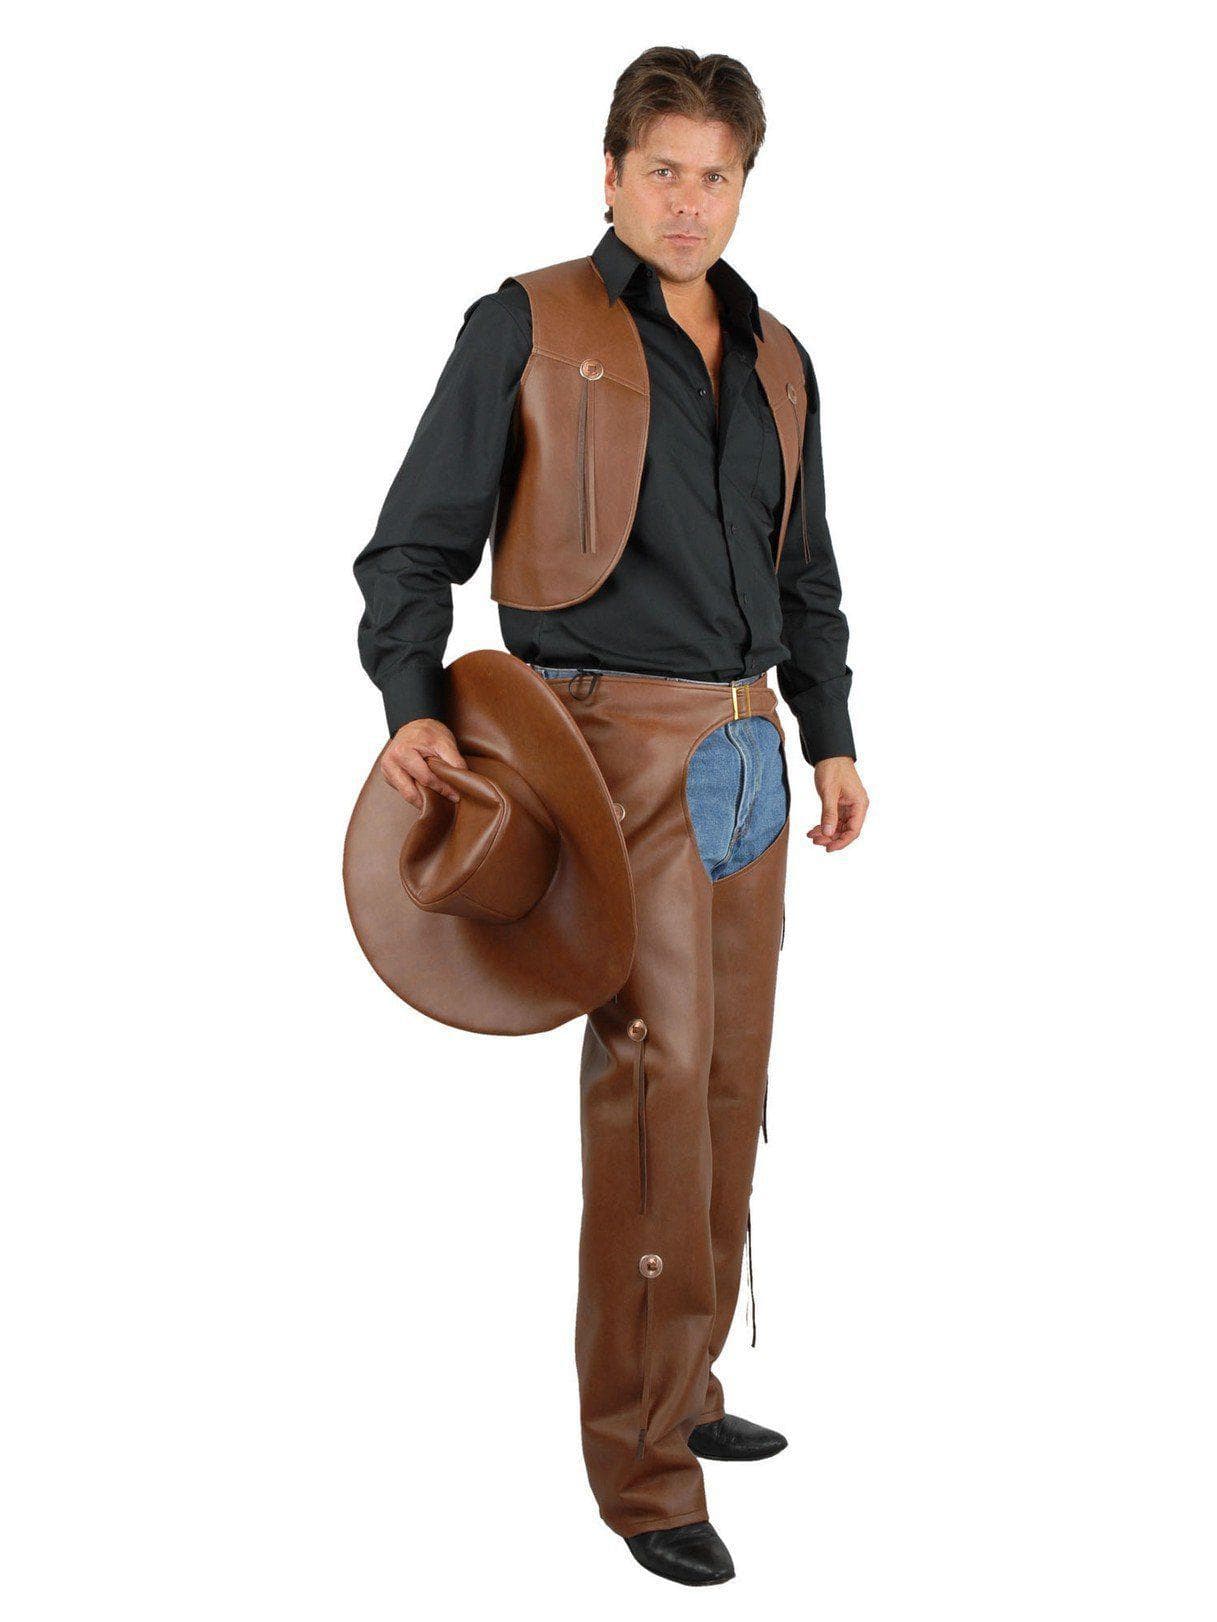 Adult Chaps & Vest Leather Brown Costume - costumes.com